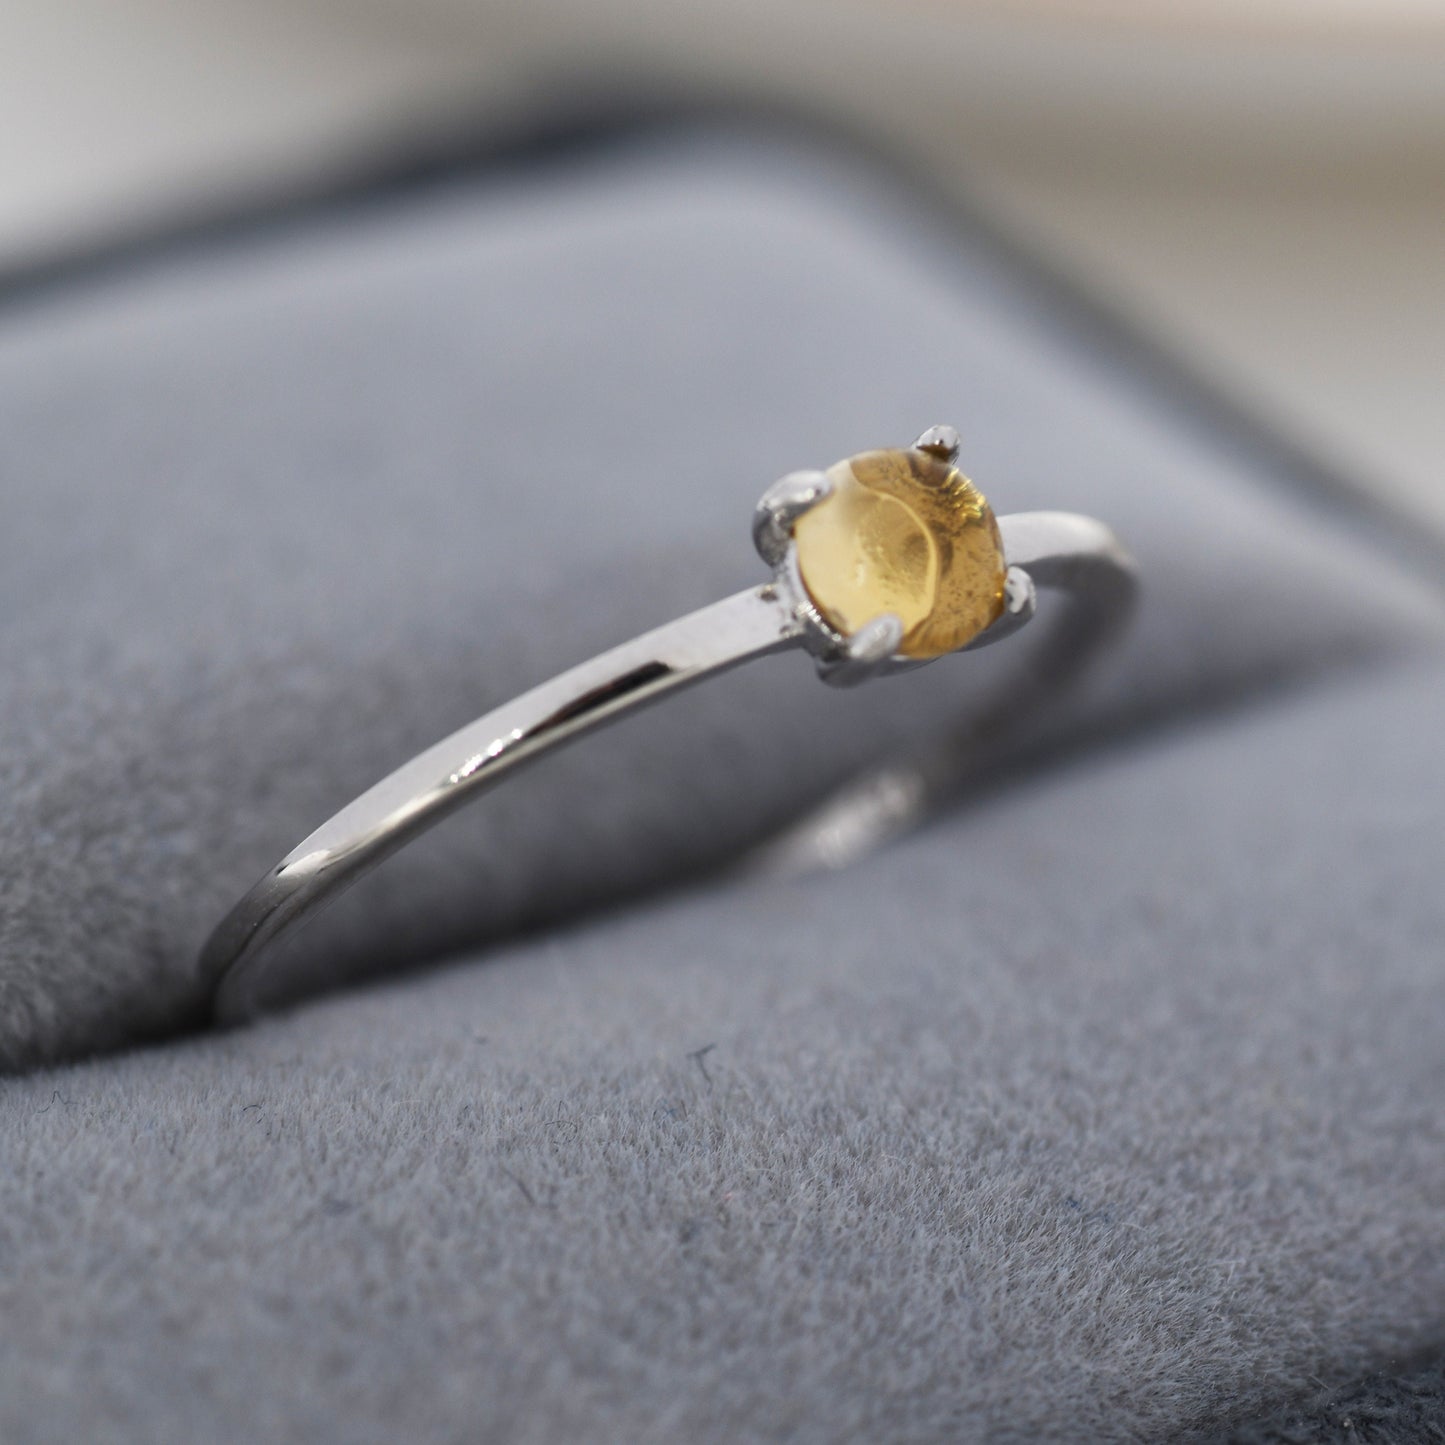 Genuine Citrine Crystal Ring in Sterling Silver, US 5 - 8, Natural Yellow Citrine Ring, November Birthstone Ring